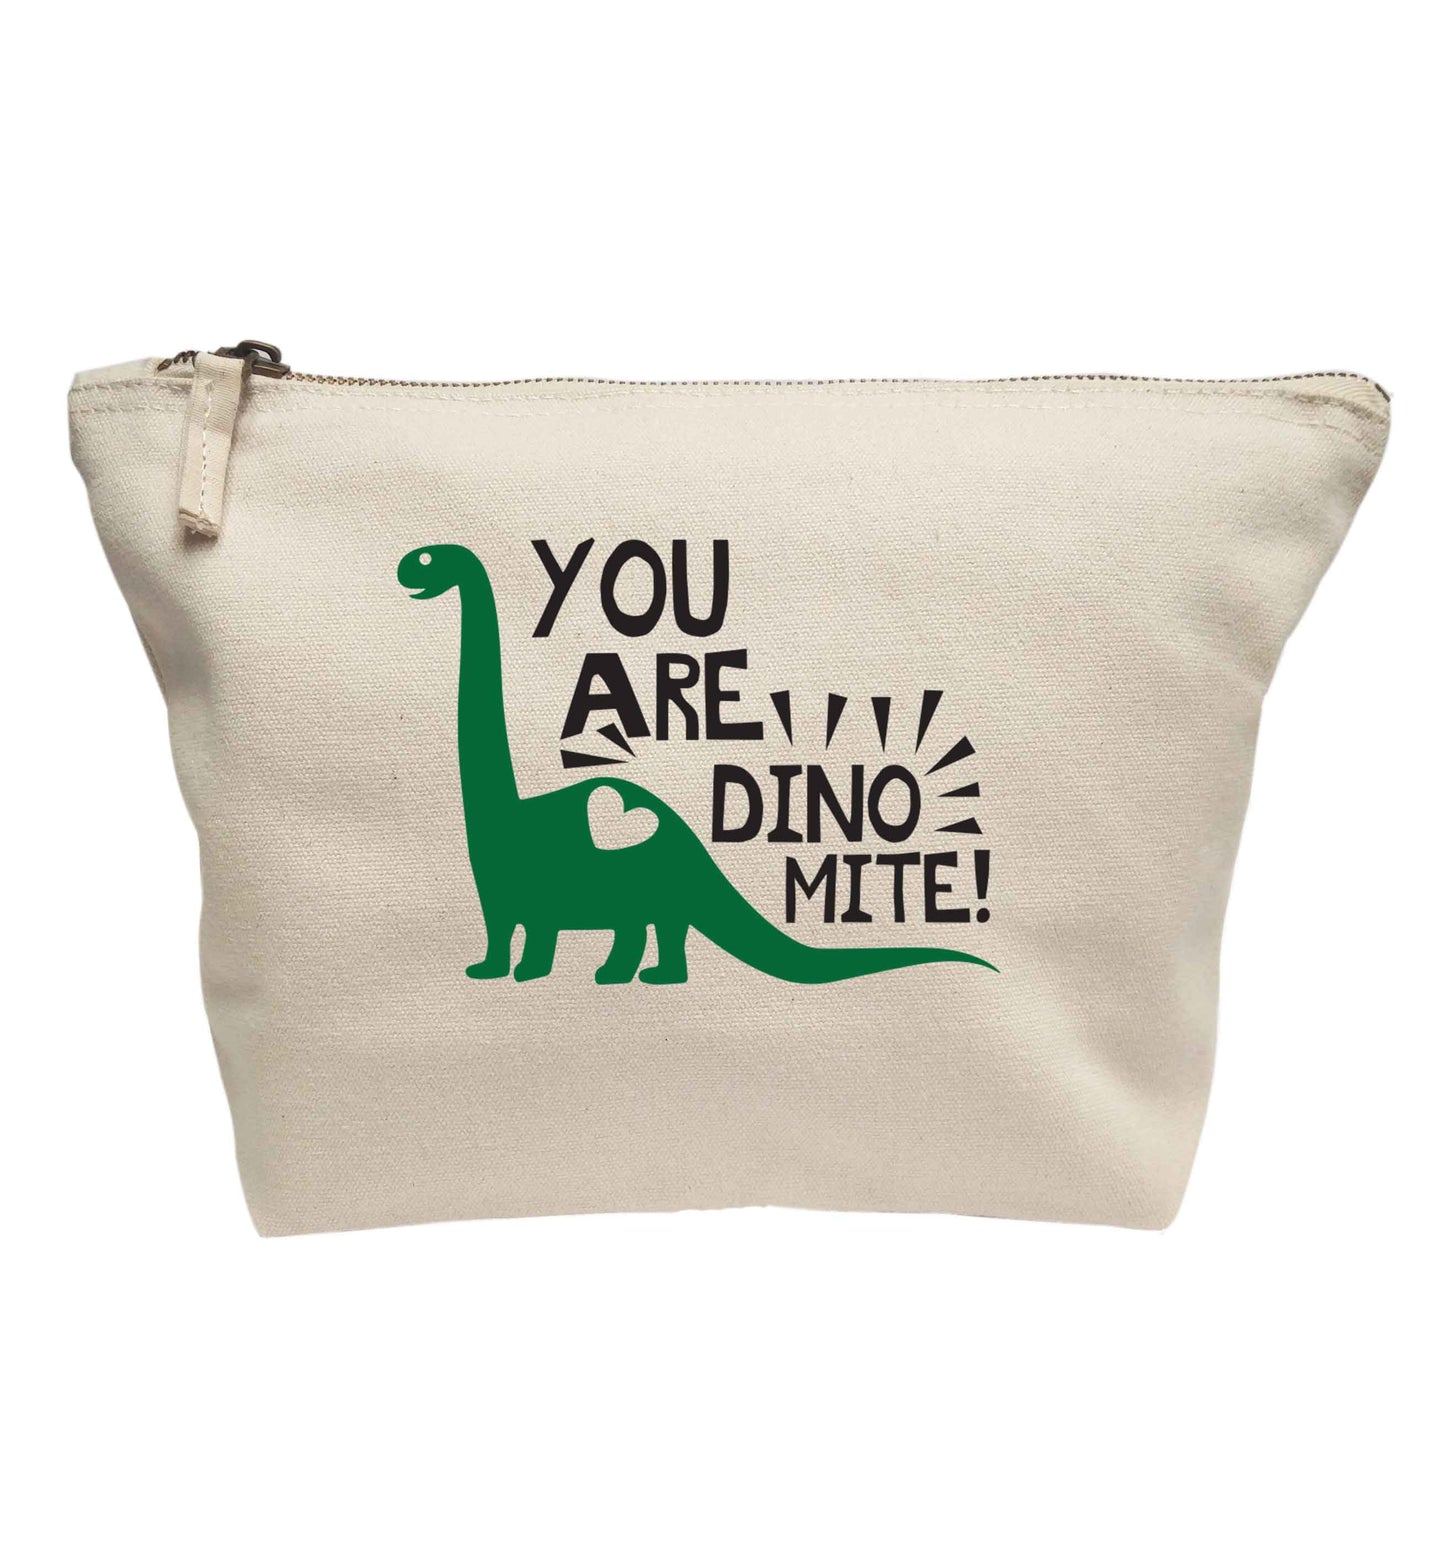 You are dinomite! | makeup / wash bag